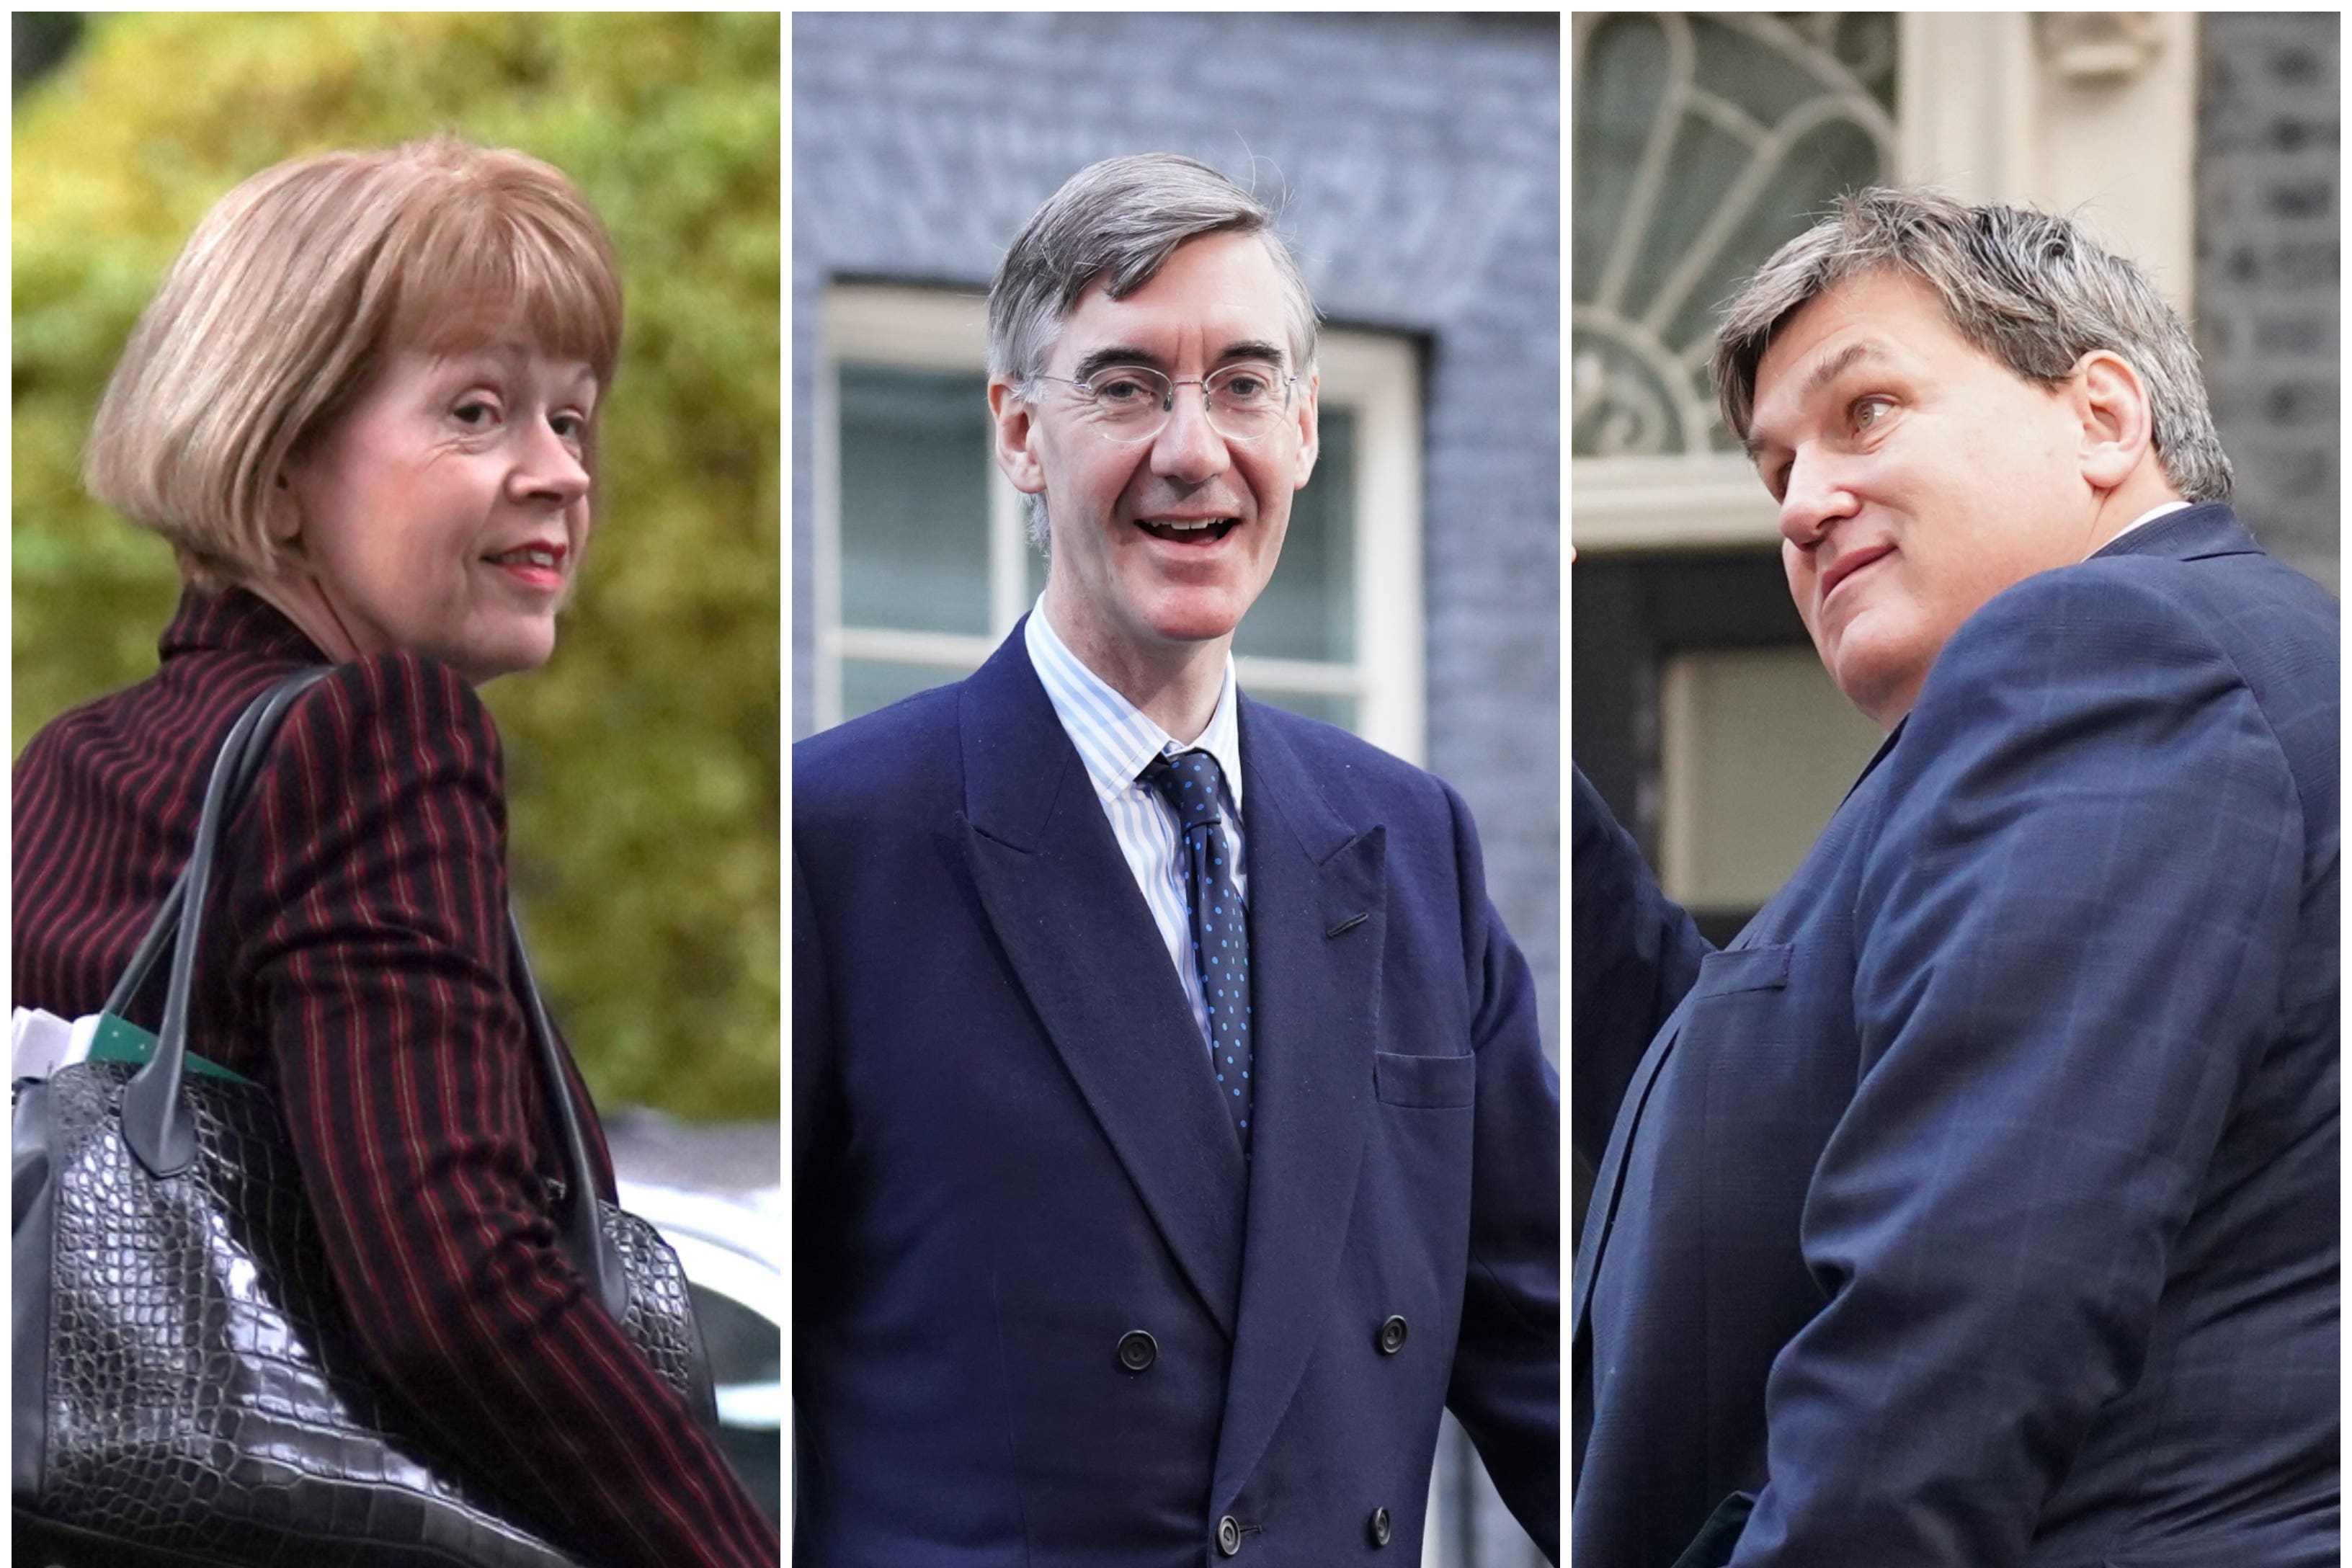 Wendy Morton, Jacob Reees-Mogg and Kit Malthouse (Kirsty O’Connor/Stefan Rousseau/PA)